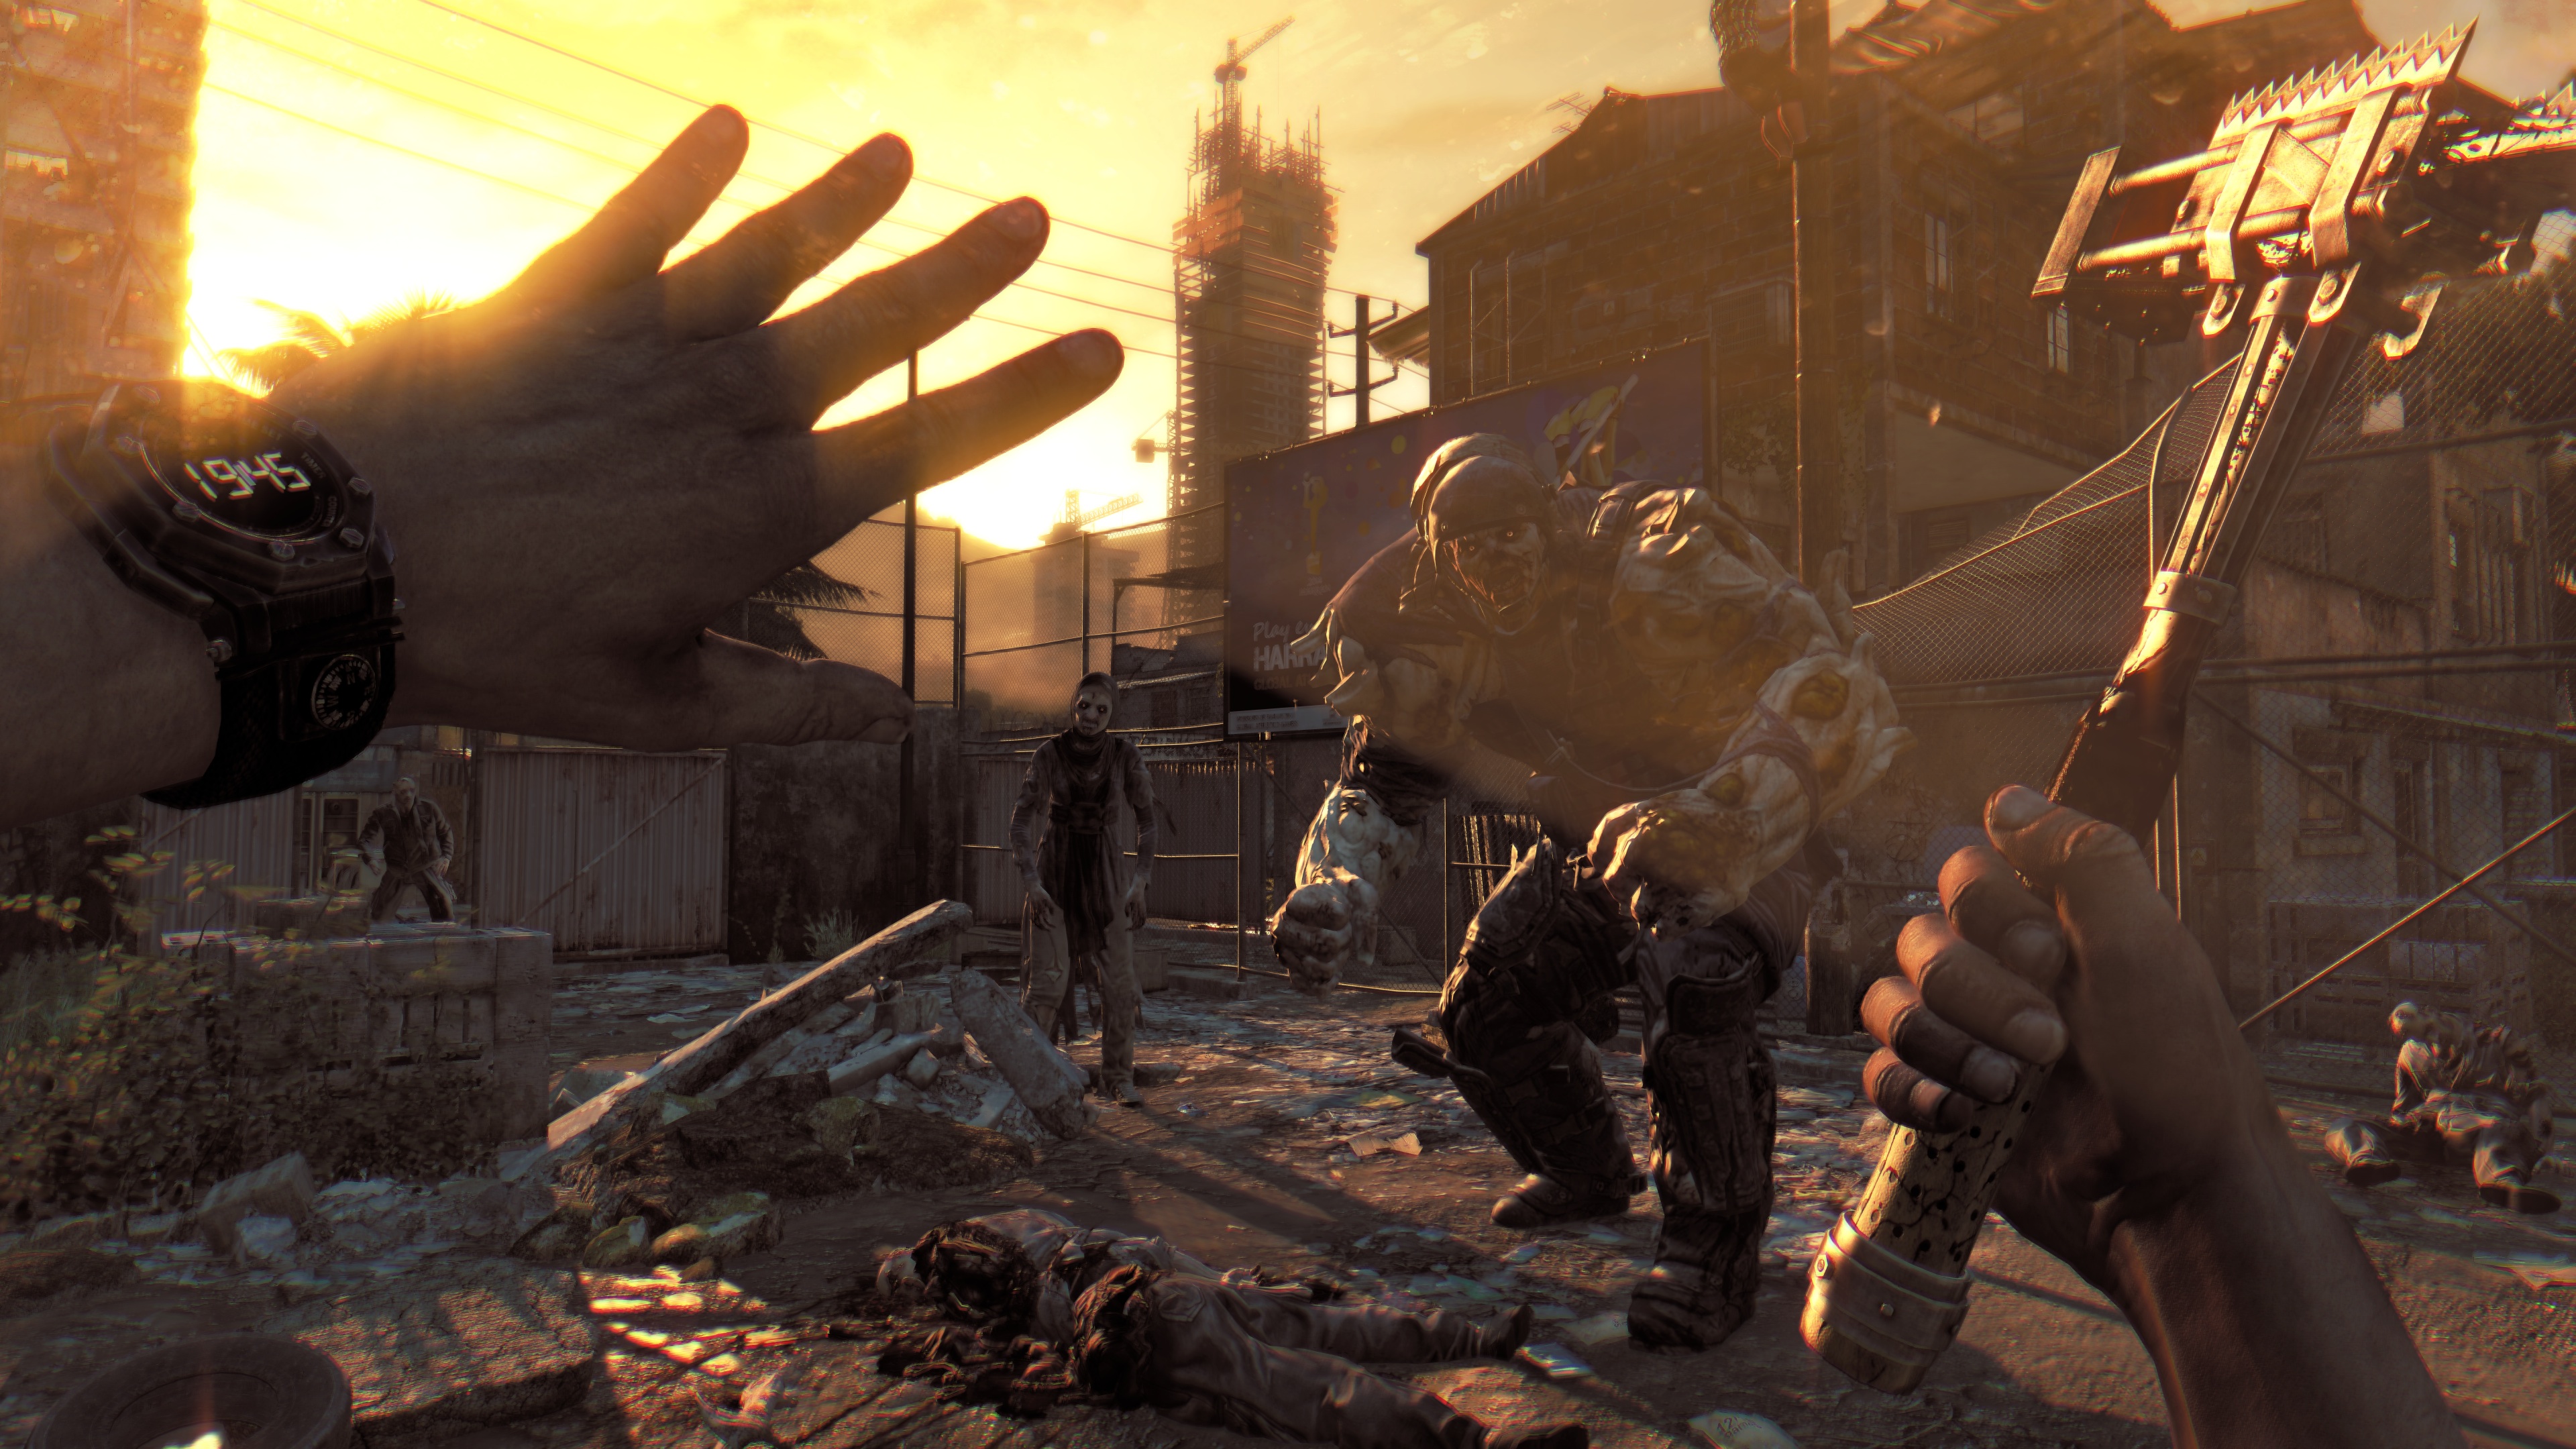 Dying Light was a surprise breakout hit for WB.